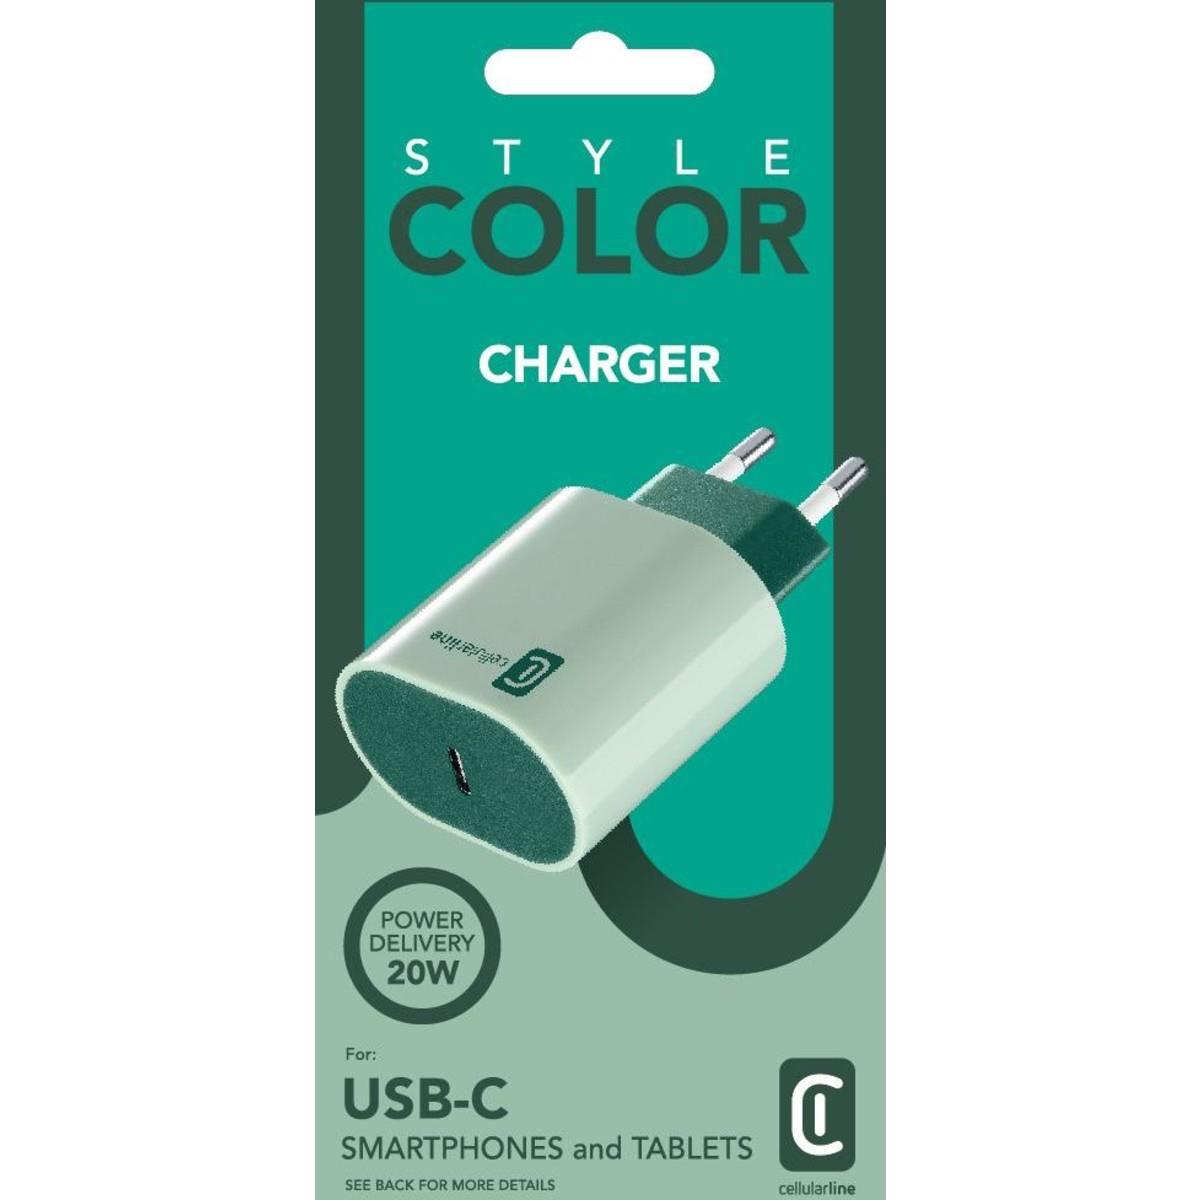 Reiselader STYLE COLOR 20W USB Type-C